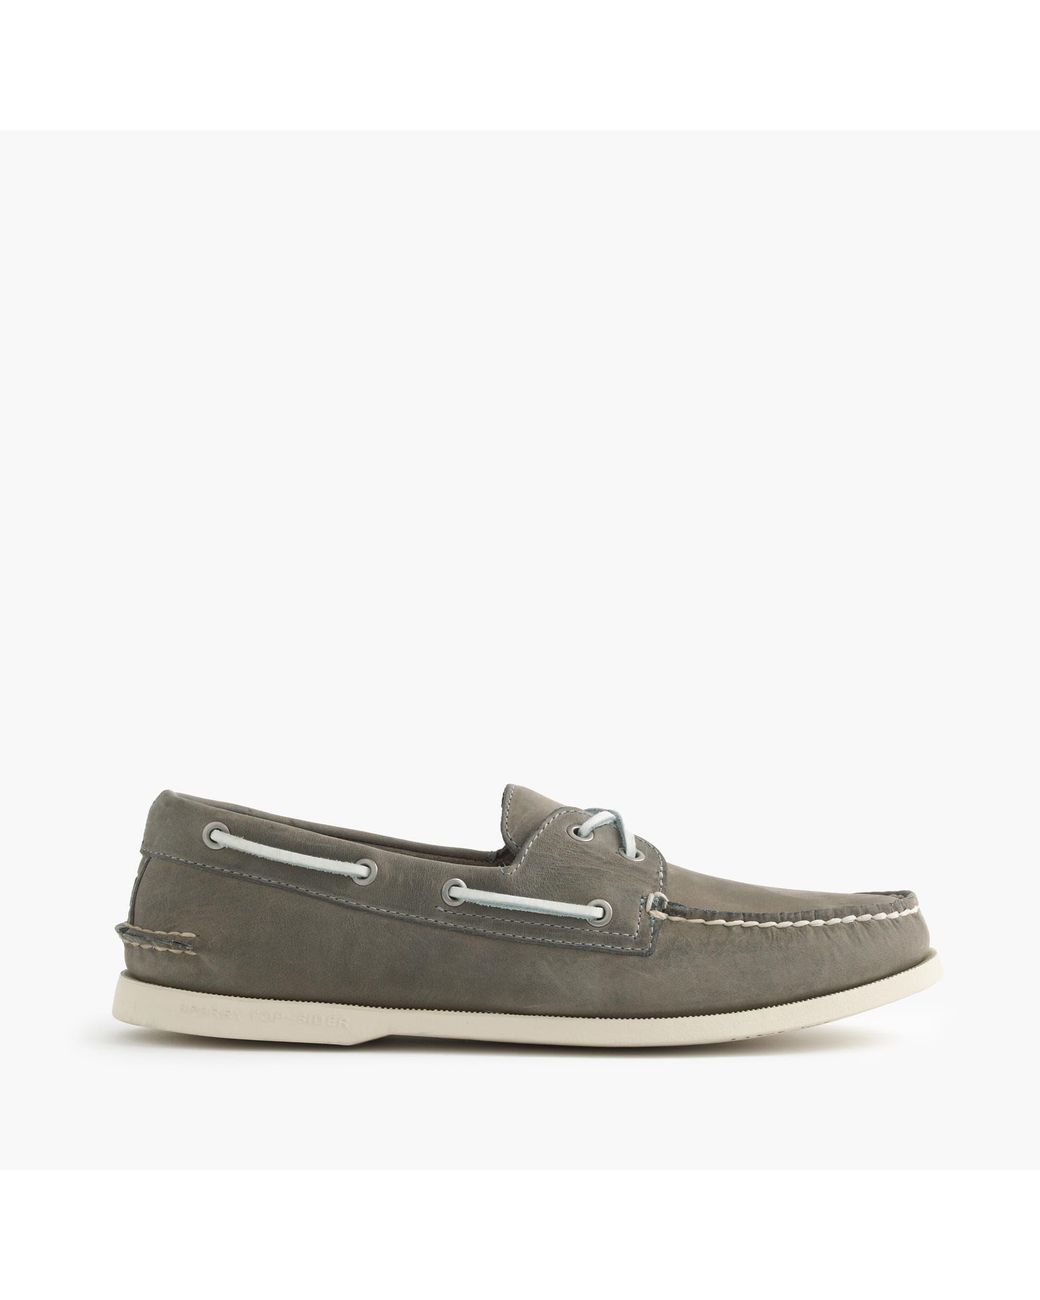 Gray sperry boat shoes for $34 with code HOORAY : r/frugalmalefashion